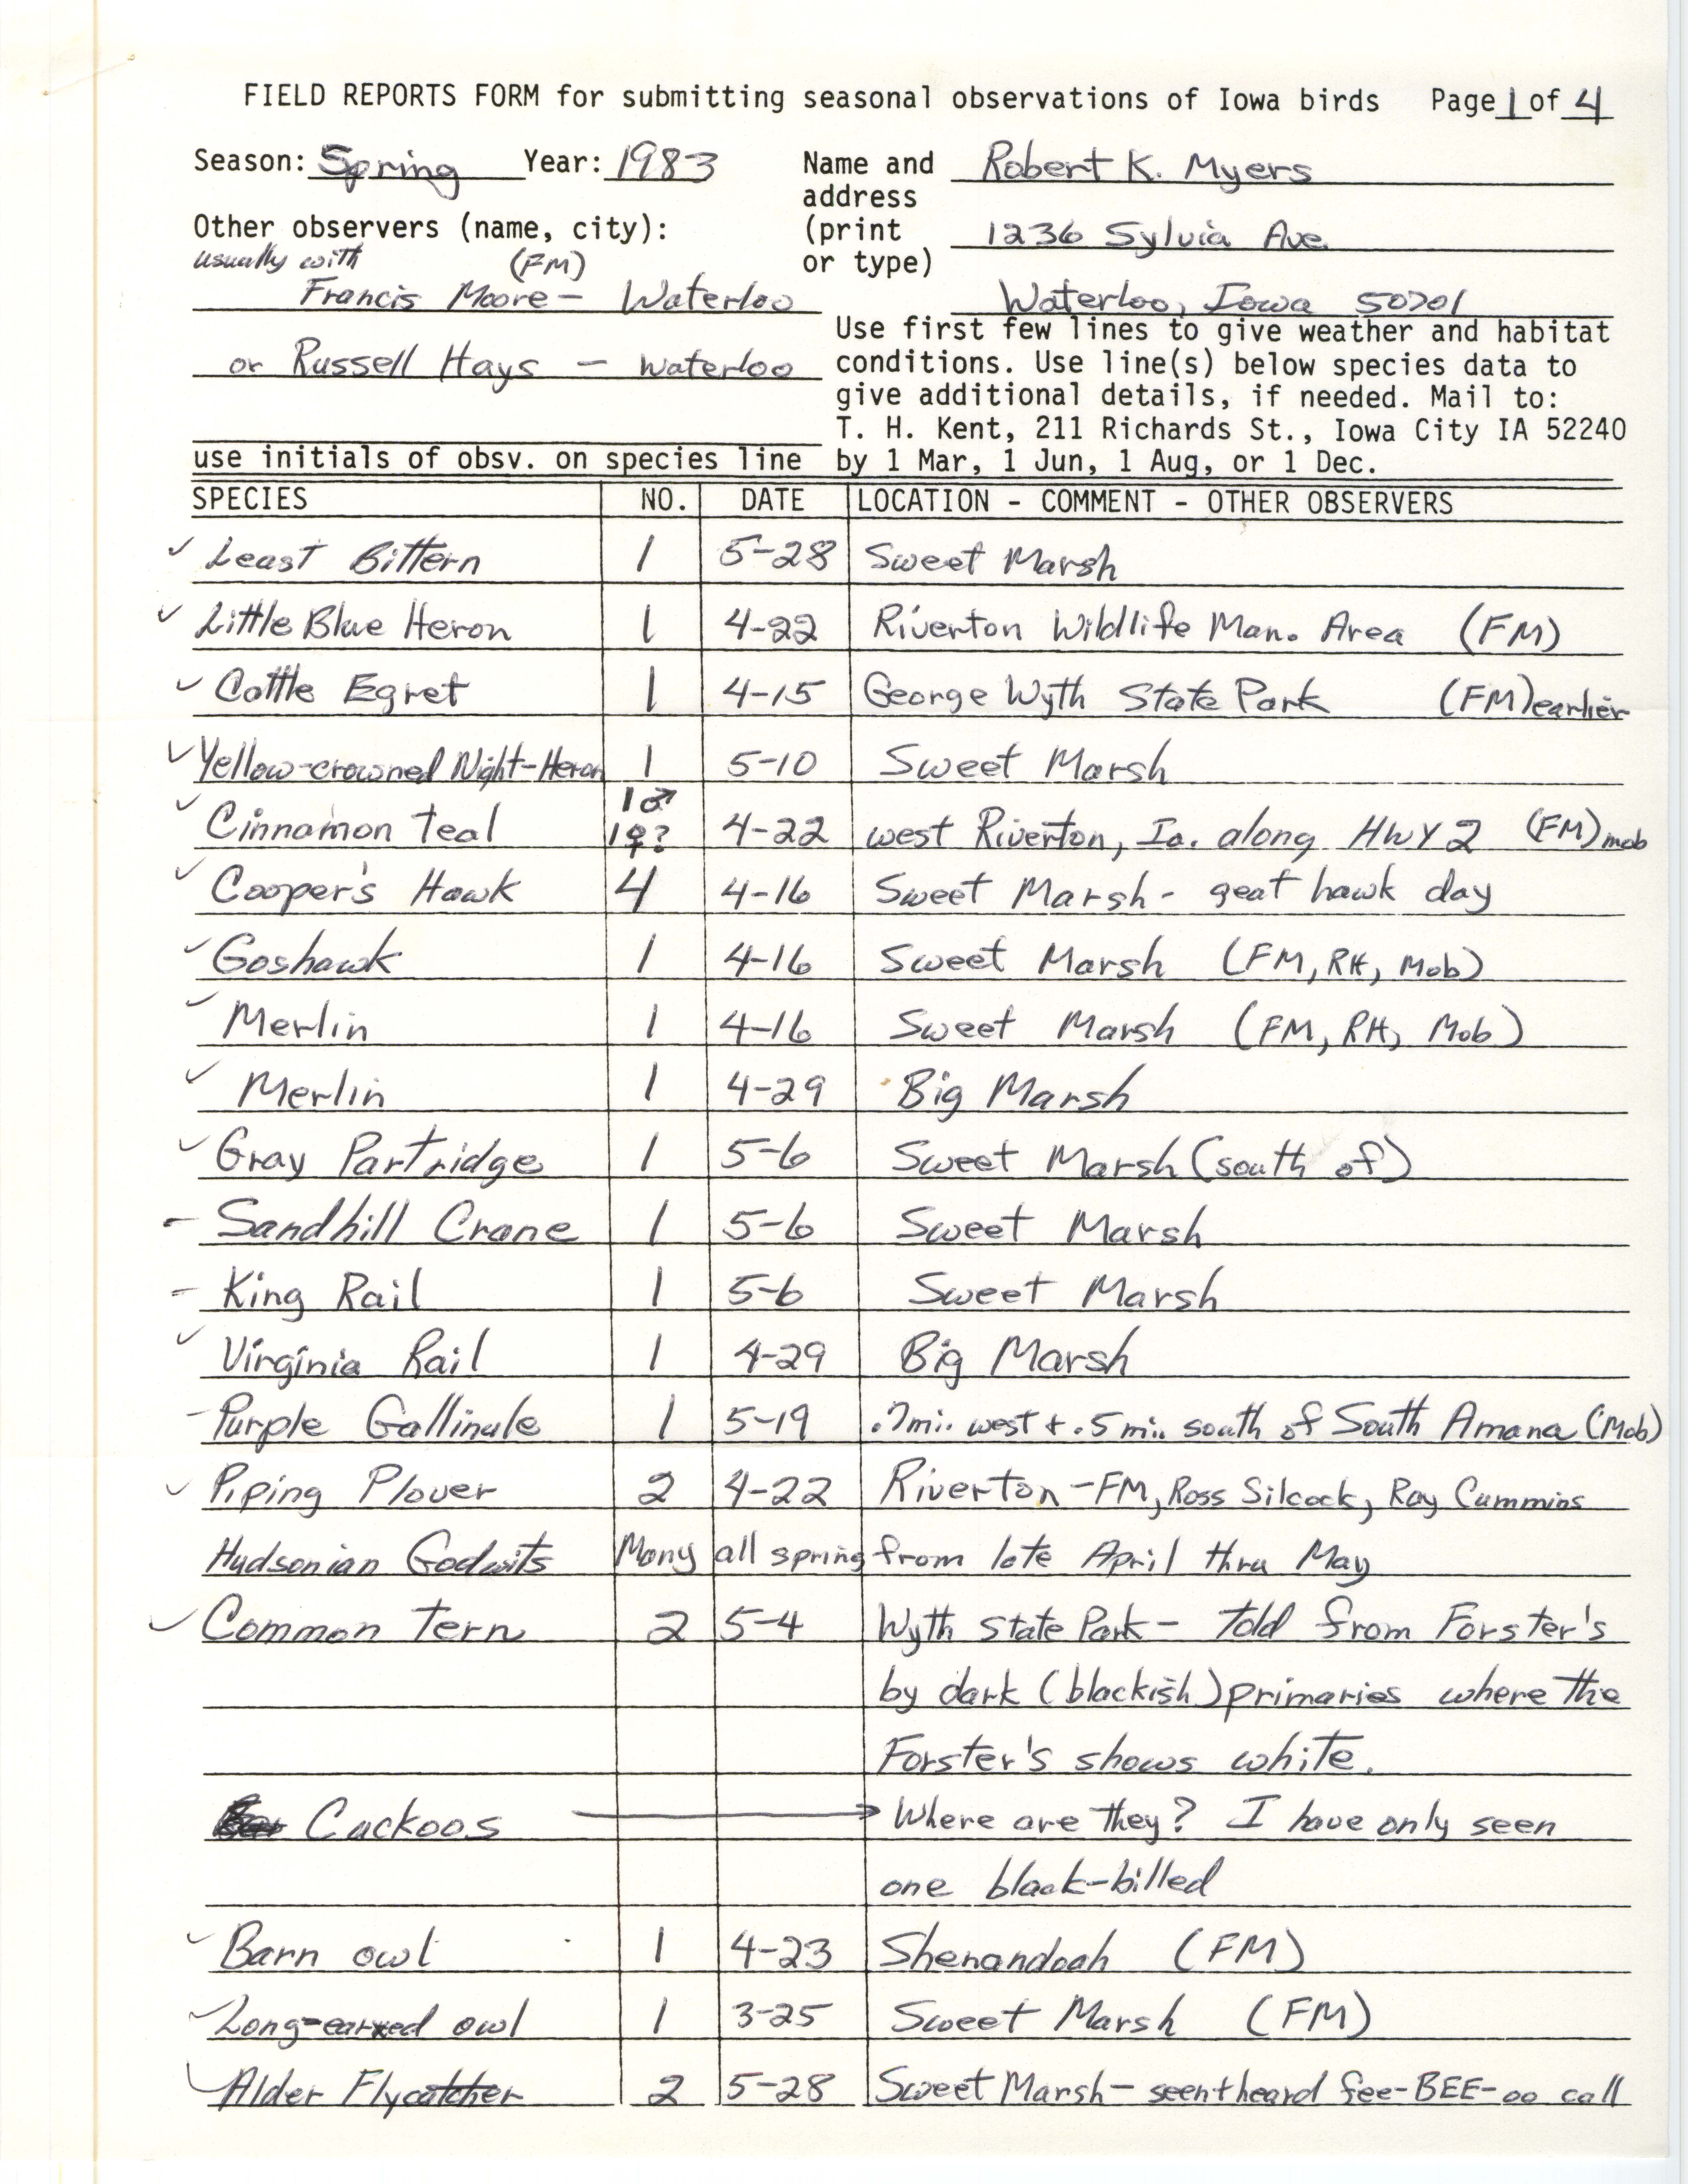 Field reports form for submitting seasonal observations of Iowa birds, Robert K. Myers, spring 1983